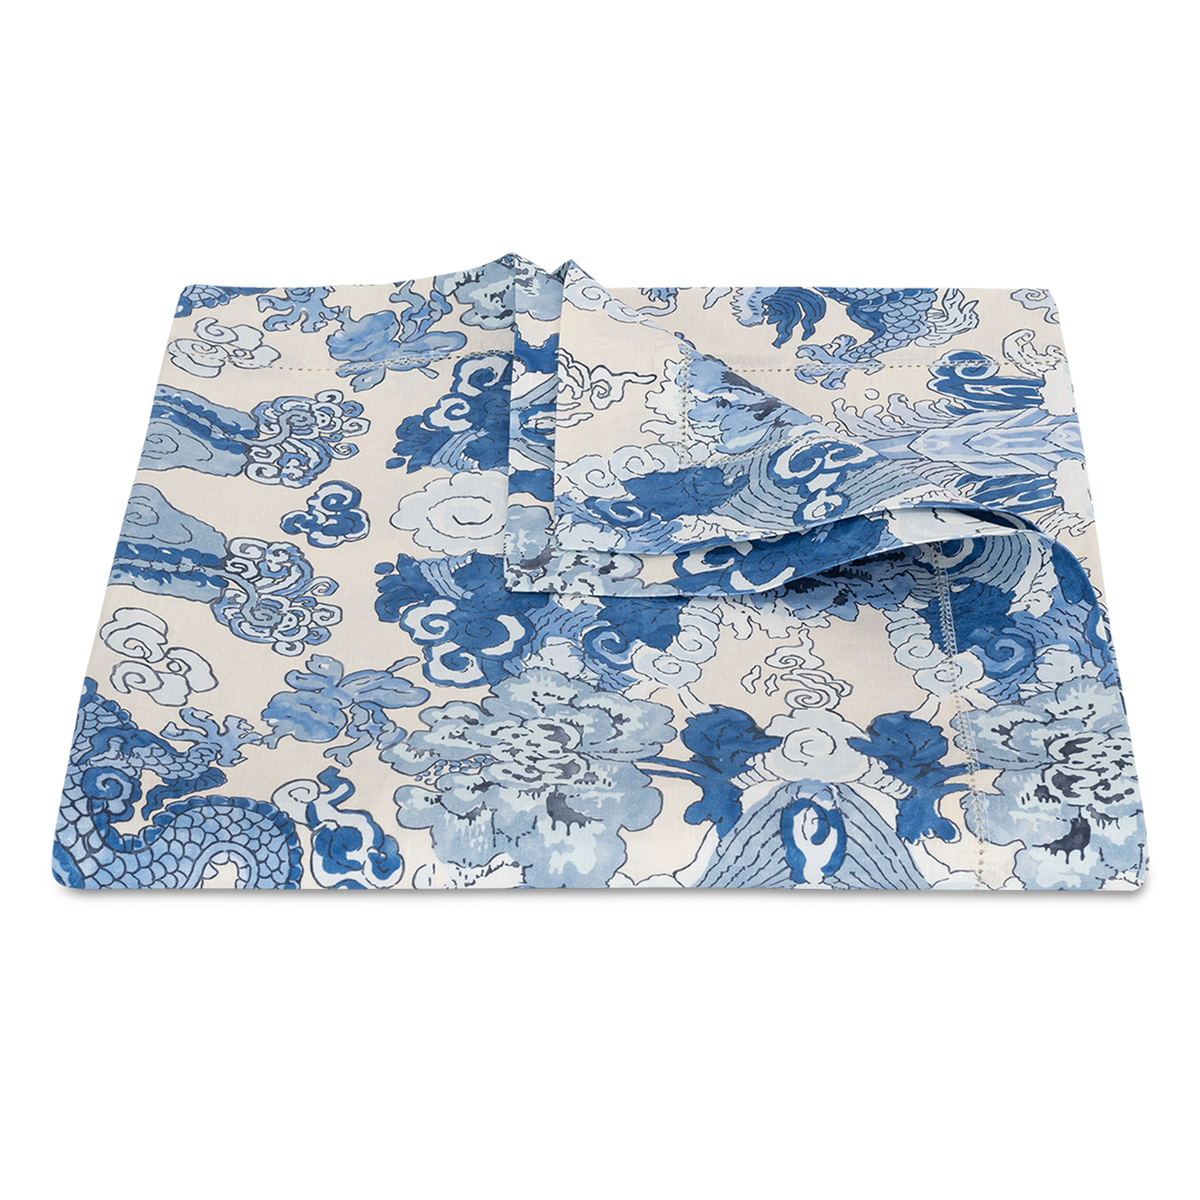 Folded Table Cloth of Matouk Schumacher Magic Mountain Table Linens in Color Porcelain Blue